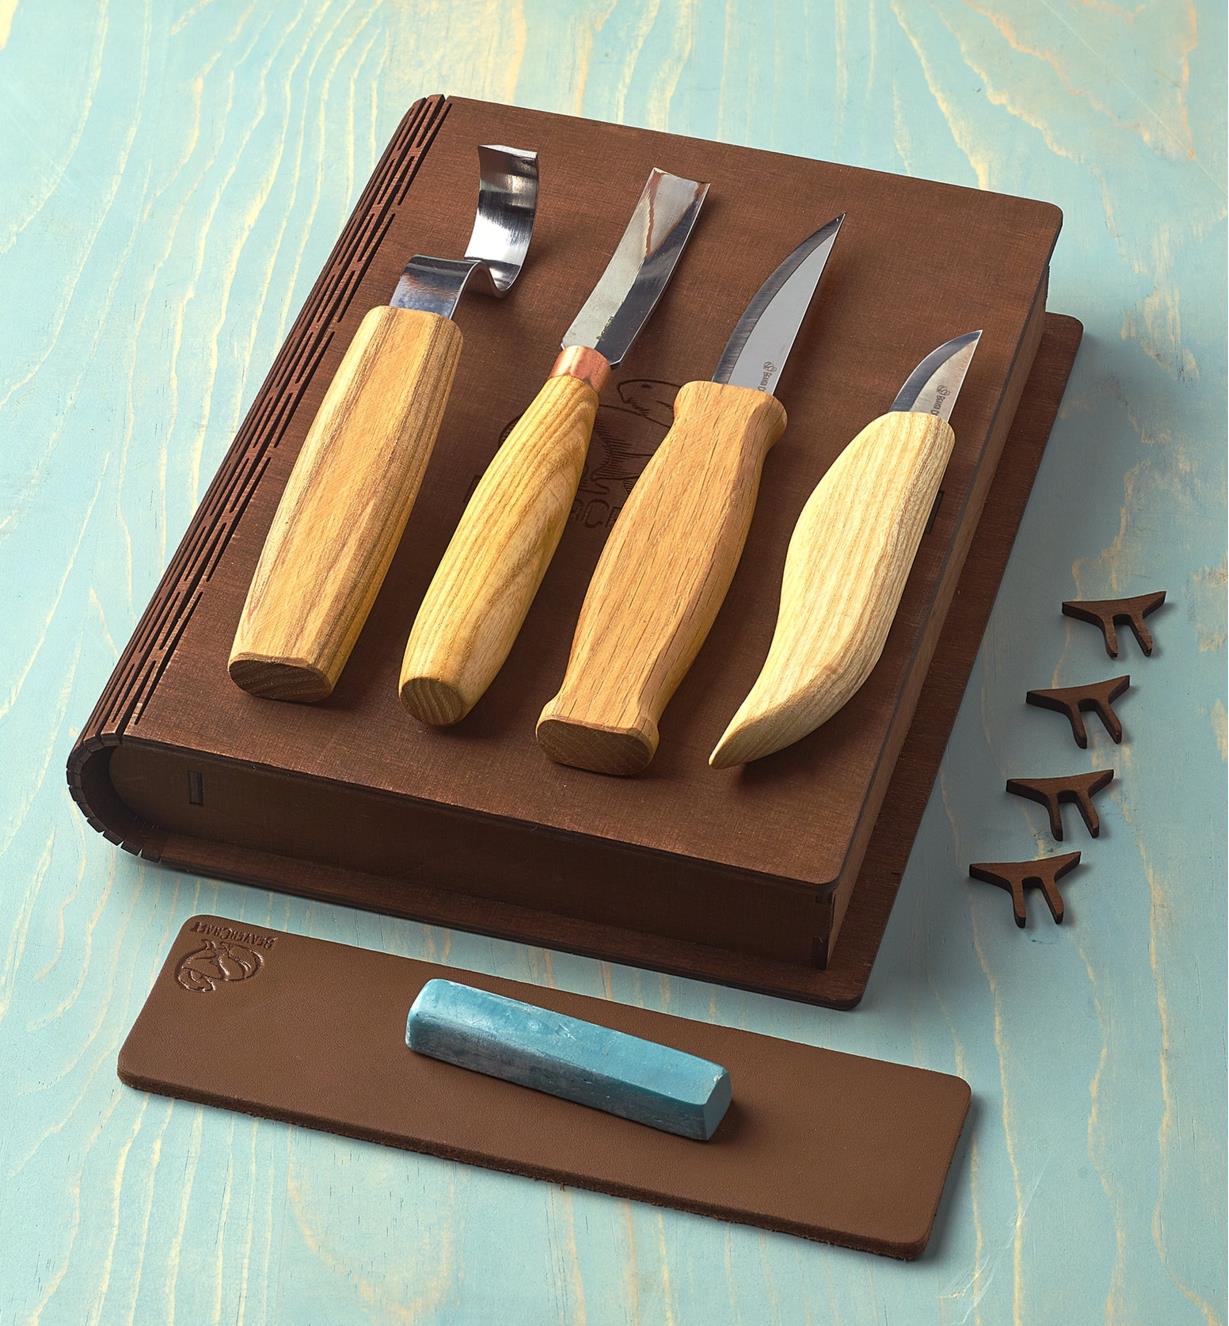 10S1090 - Spoon Carving Set